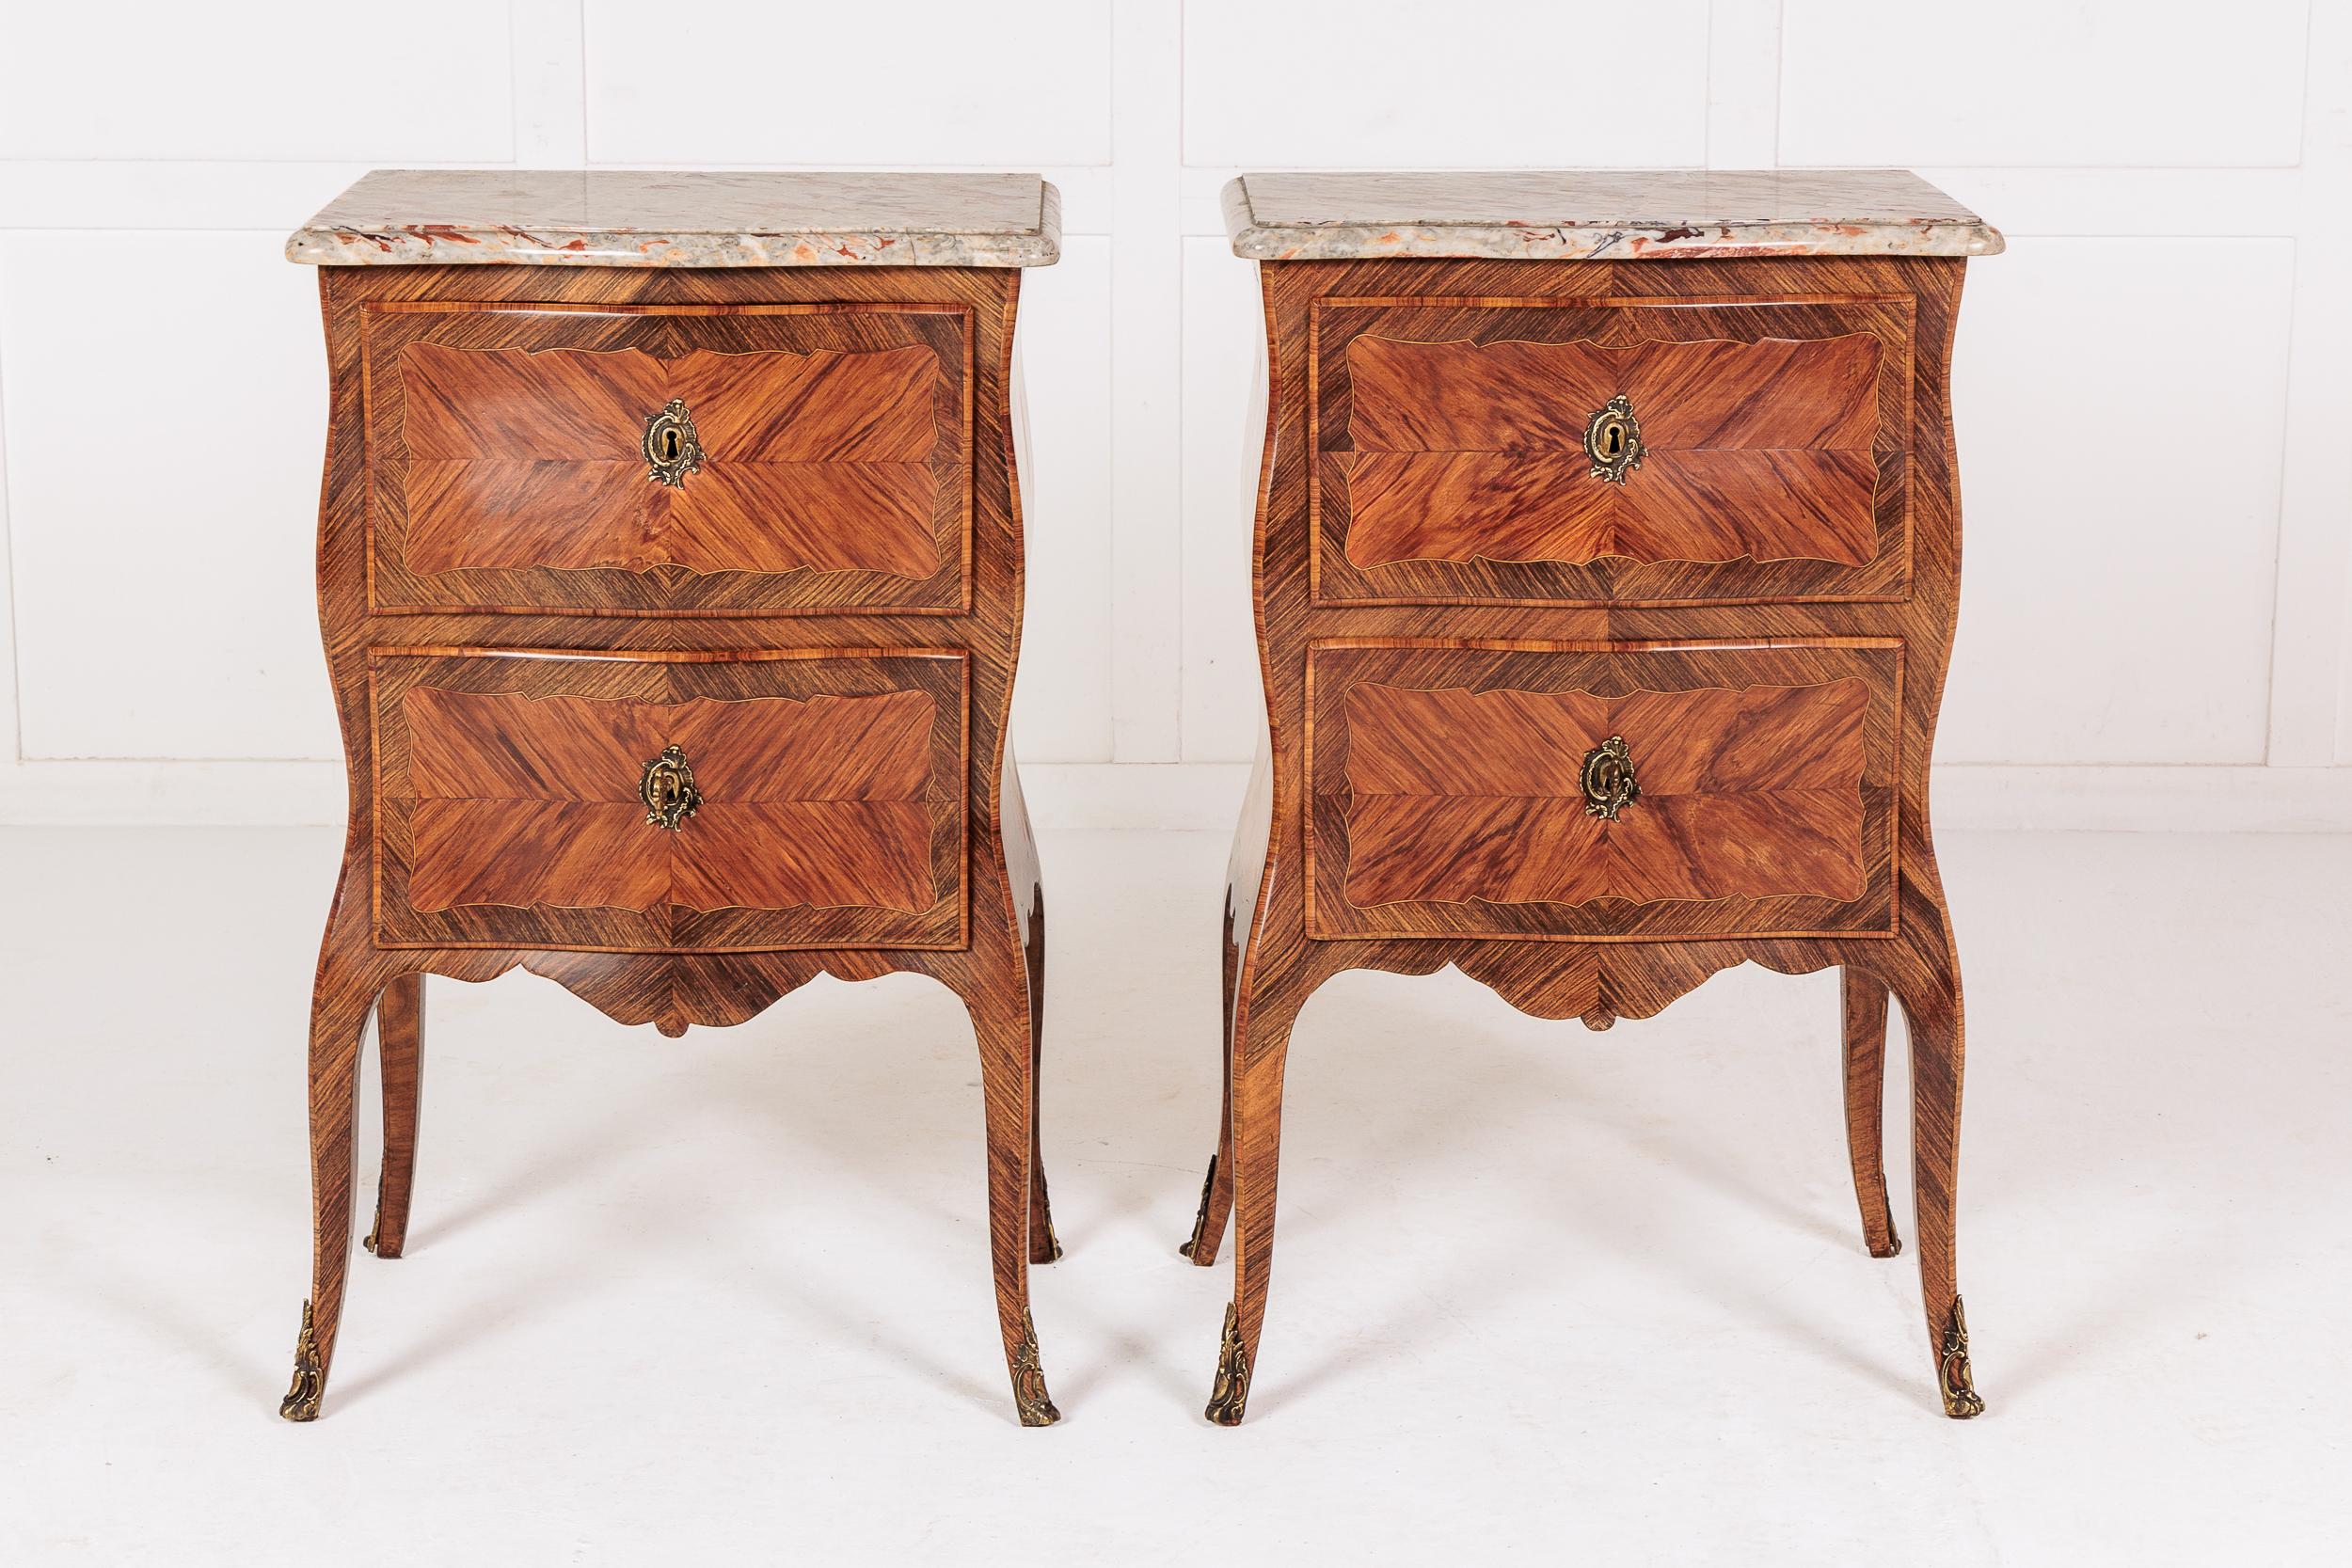 Pair of 19th Century Italian Bedside Cabinets with Marble Tops In Good Condition For Sale In Gloucestershire, GB